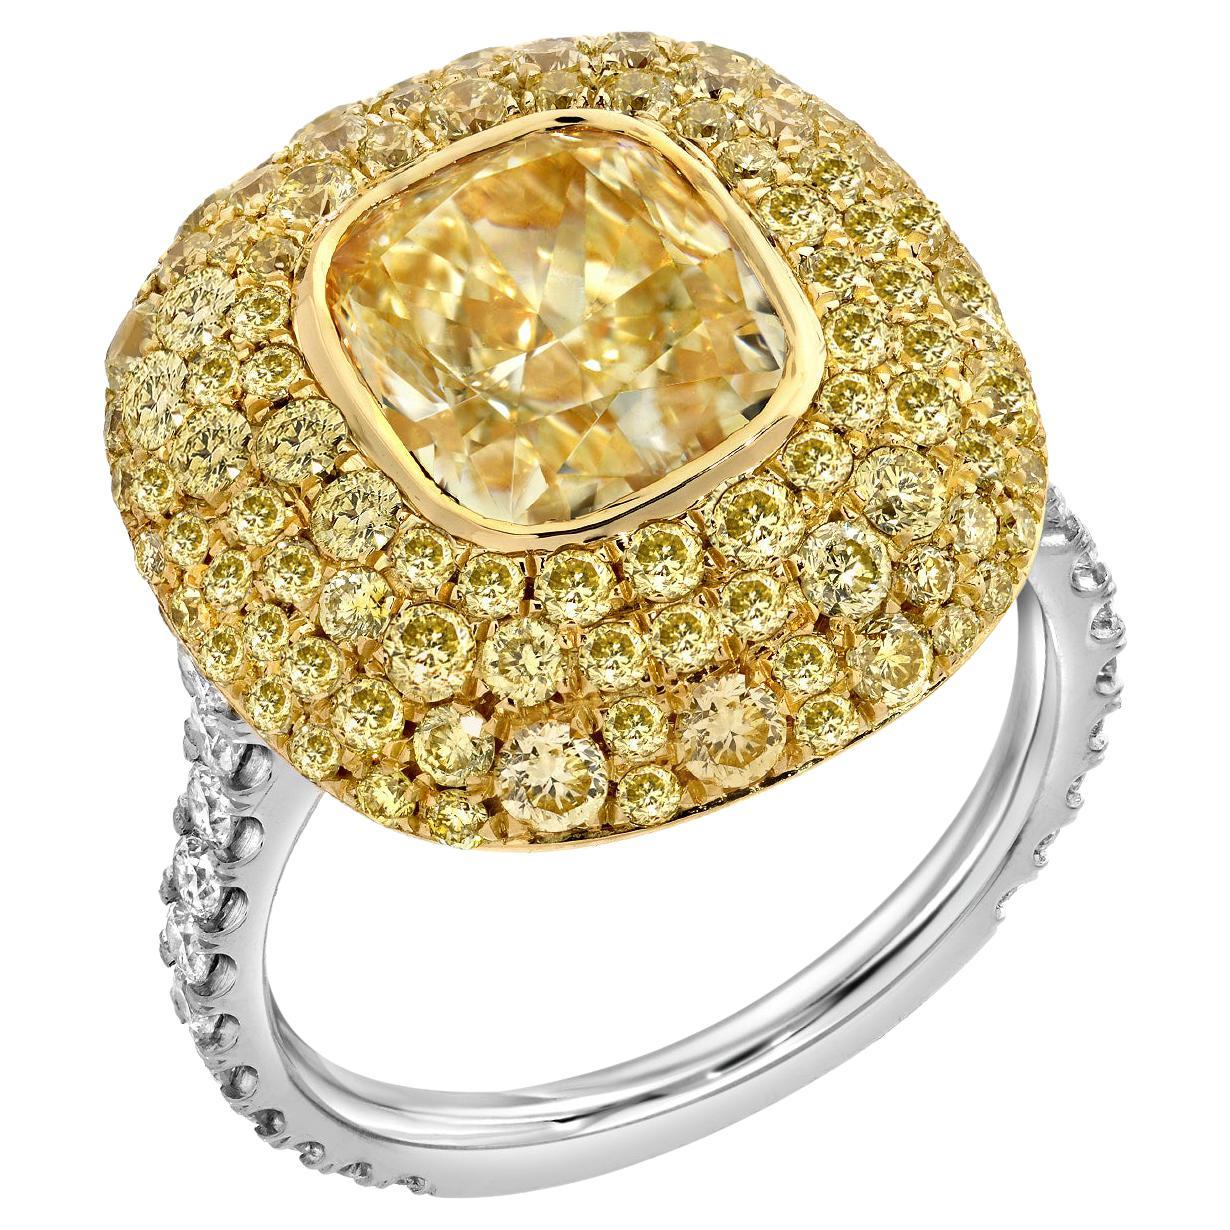 Fancy Light Yellow Diamond Ring 3.01 Carat Cushion Cut GIA Certified In New Condition For Sale In Beverly Hills, CA